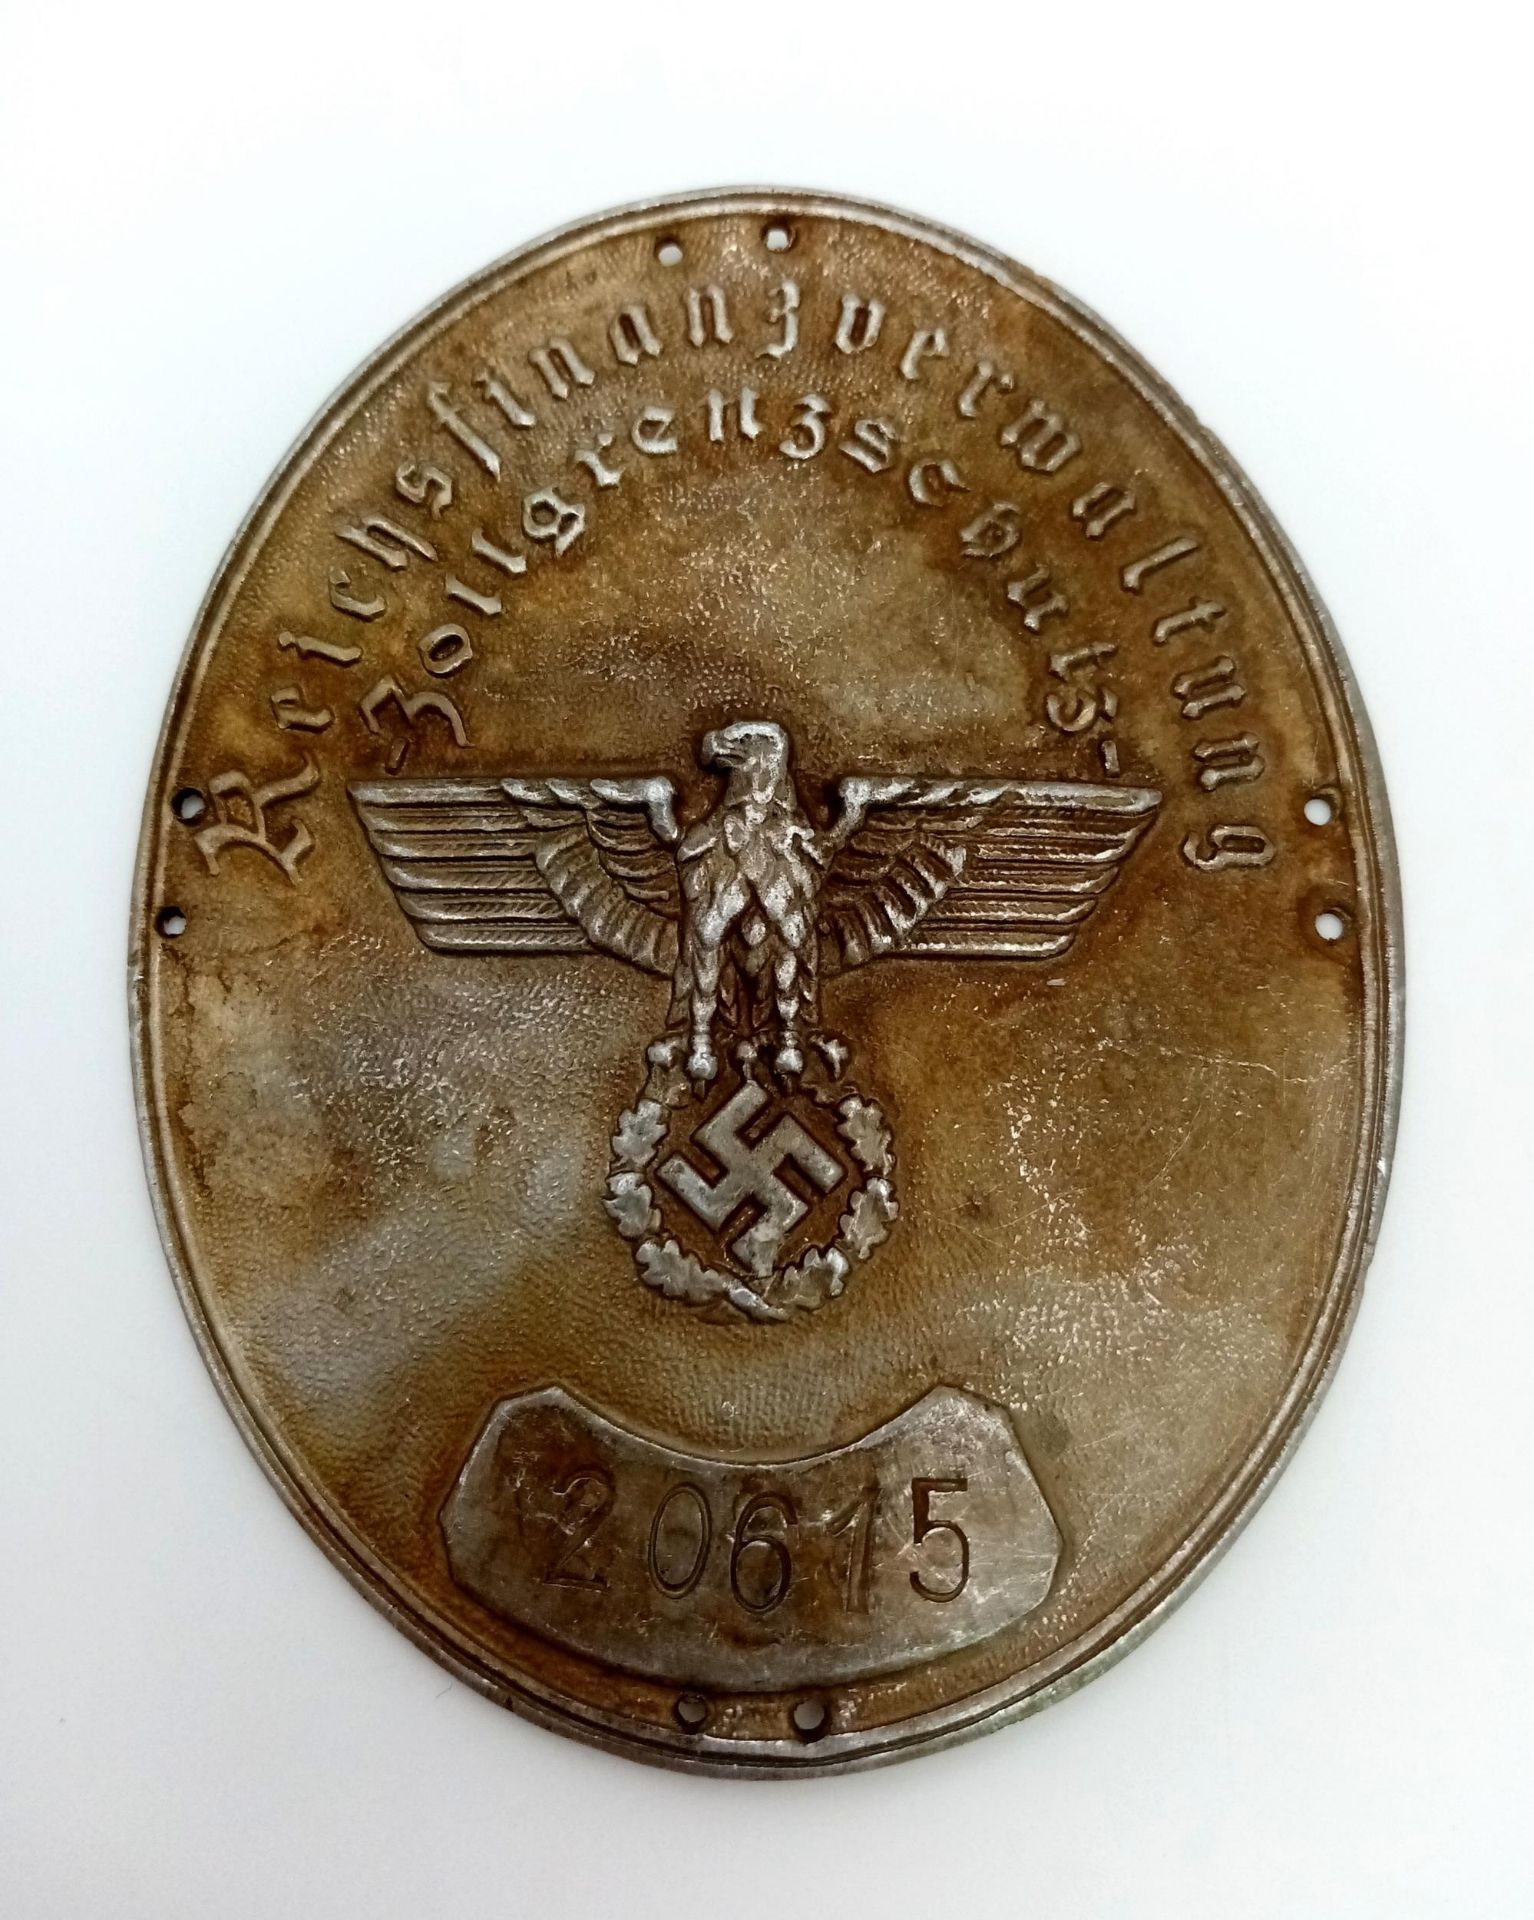 3rd Reich Border Police Arm Badge. Serial numbered to an individual Guard.